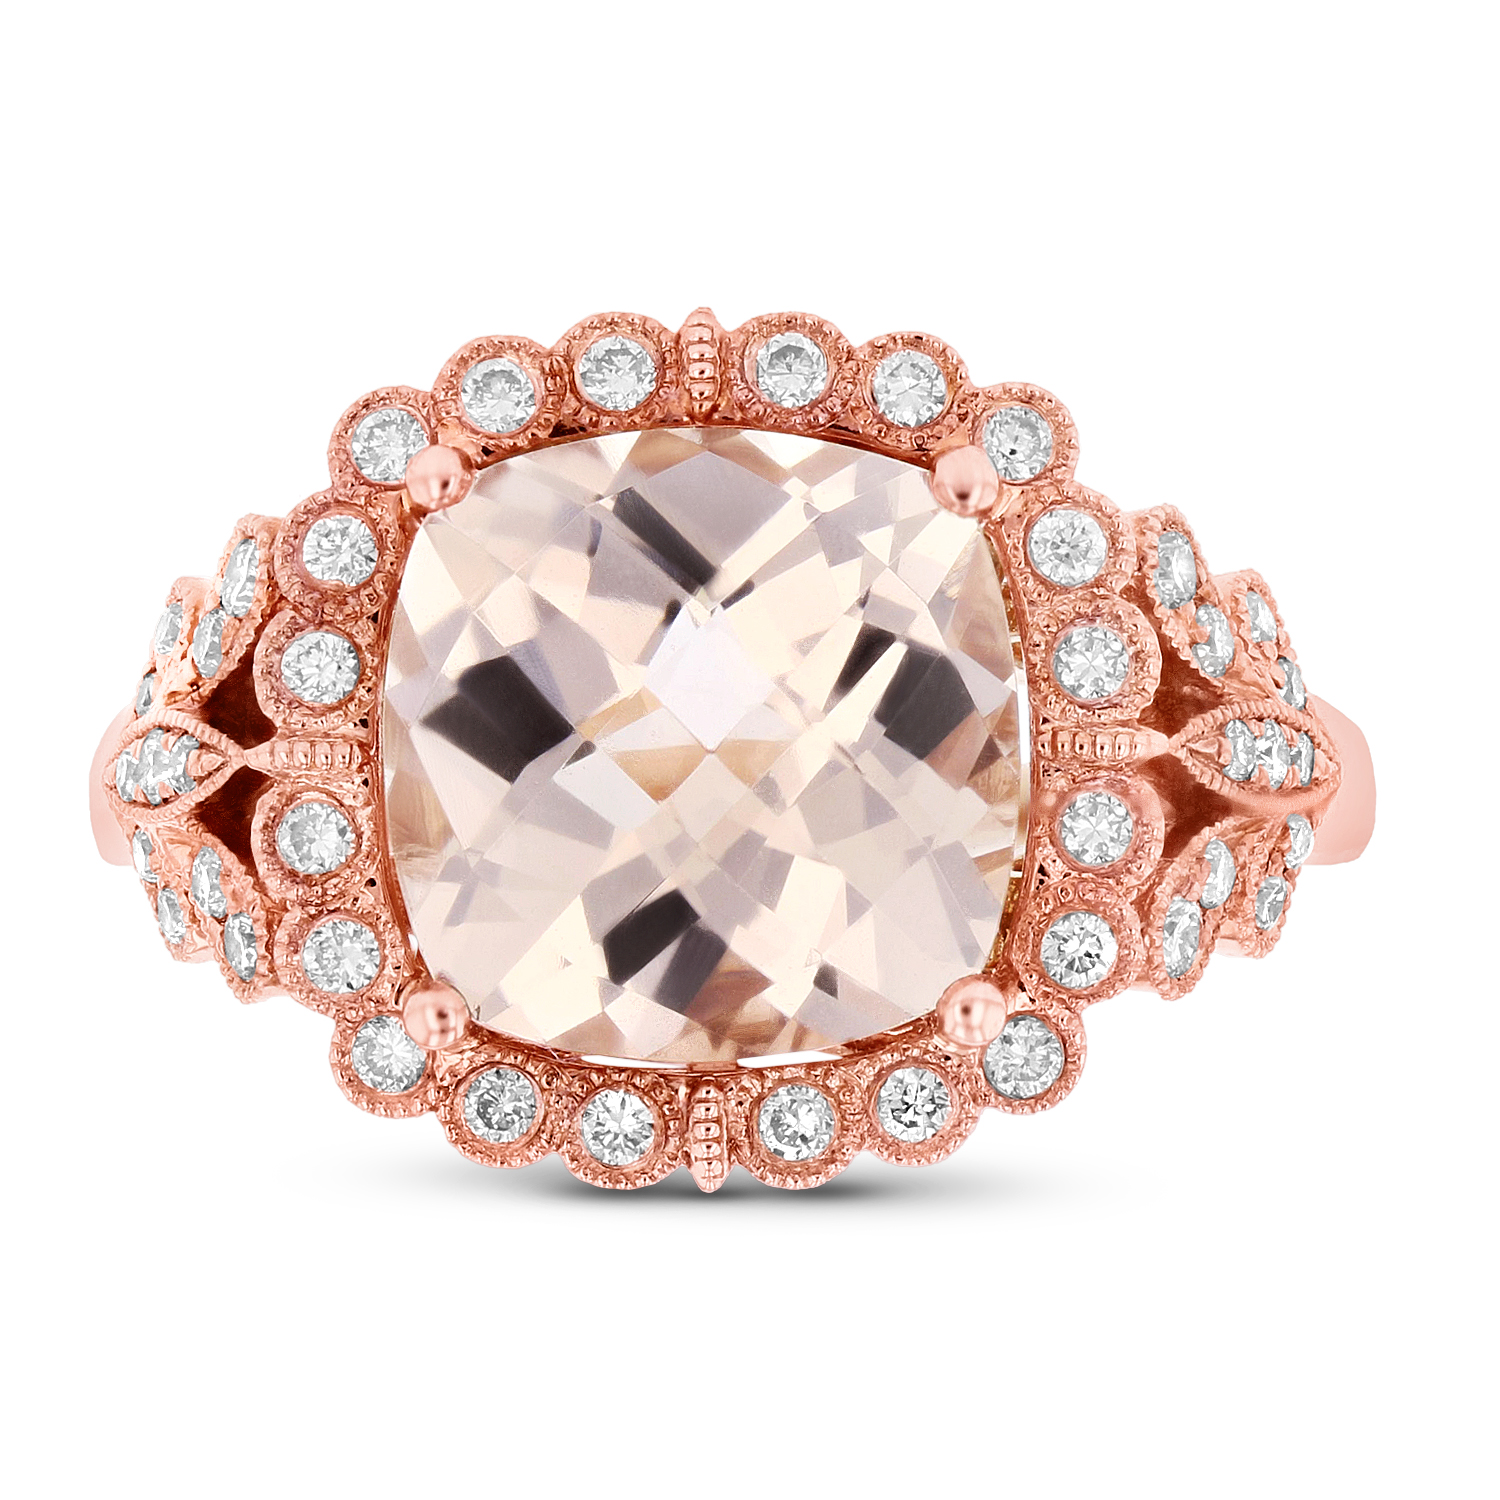 View Diamond and 9.5mm Cushion Cut Morganite Ring in 14k Rose Gold